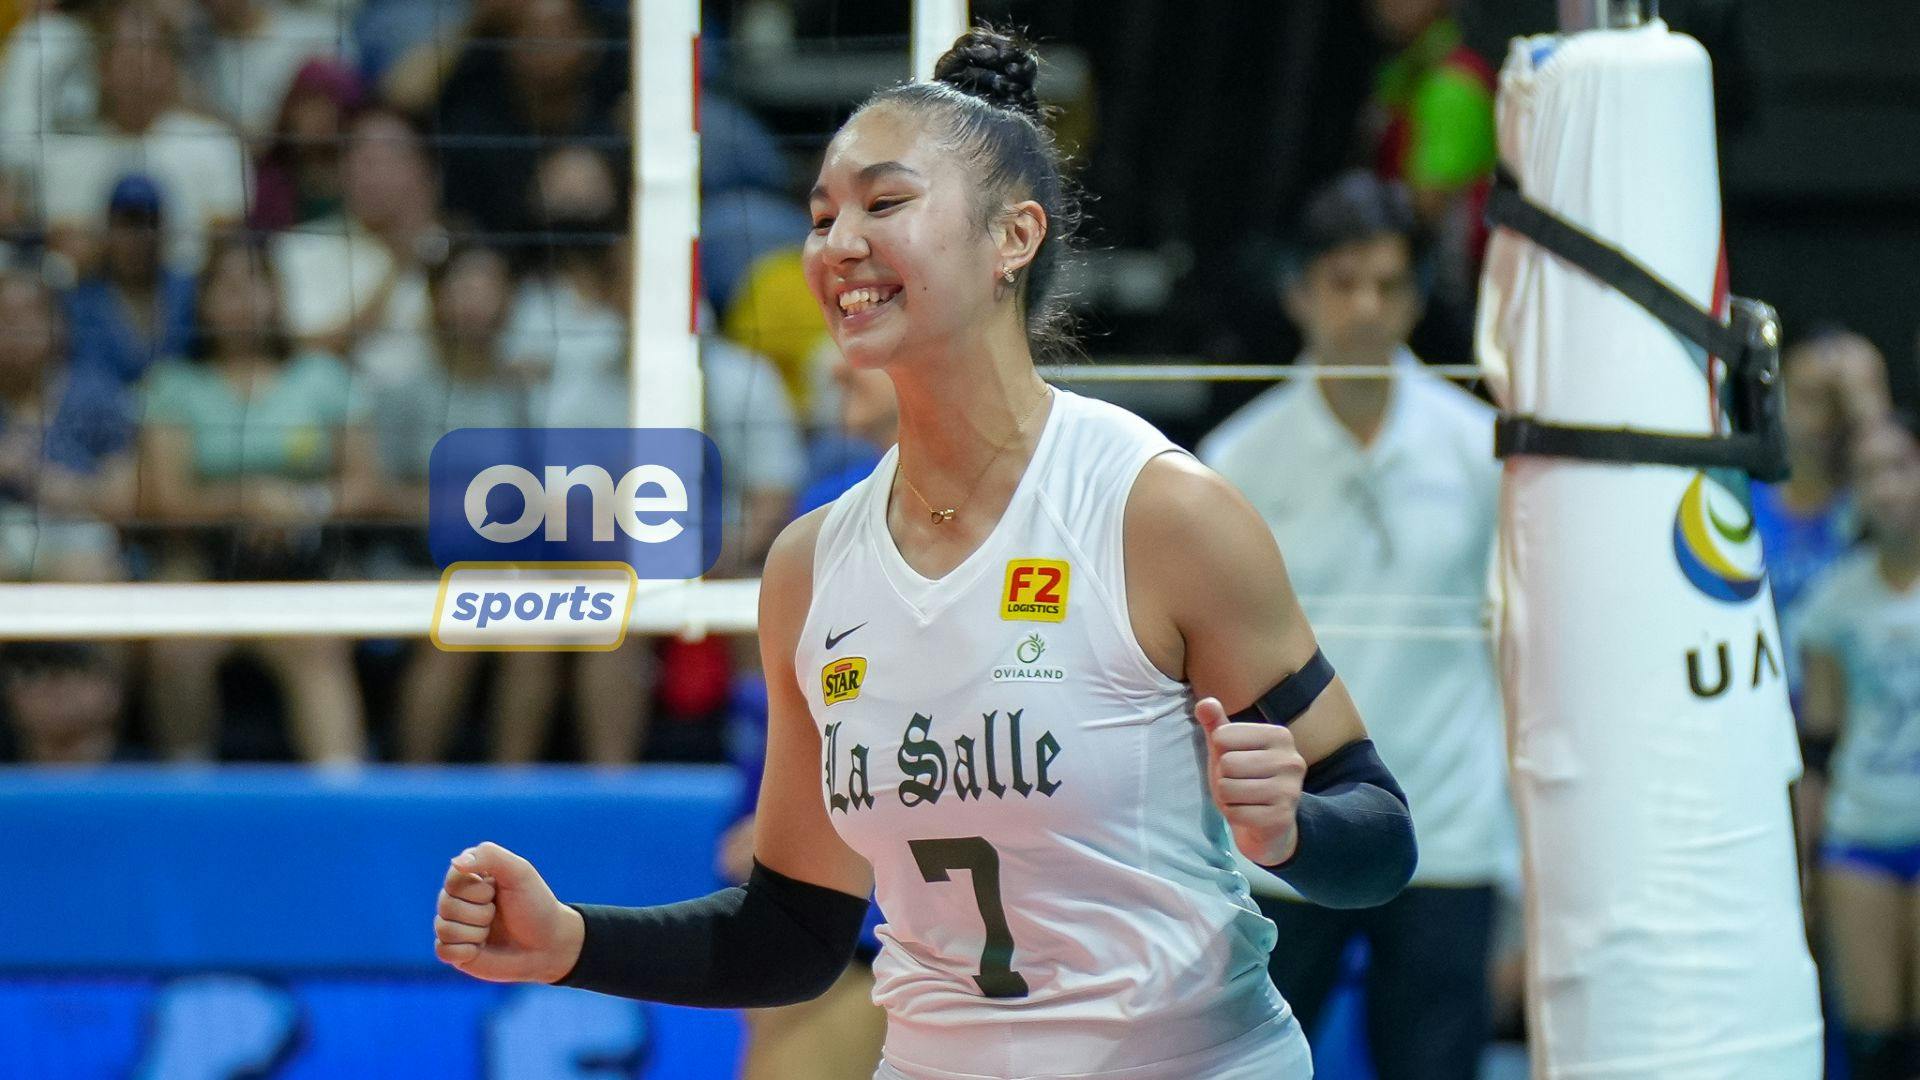 UAAP: Shevana Laput admits being ‘a work in progress’ even after stellar performances for La Salle